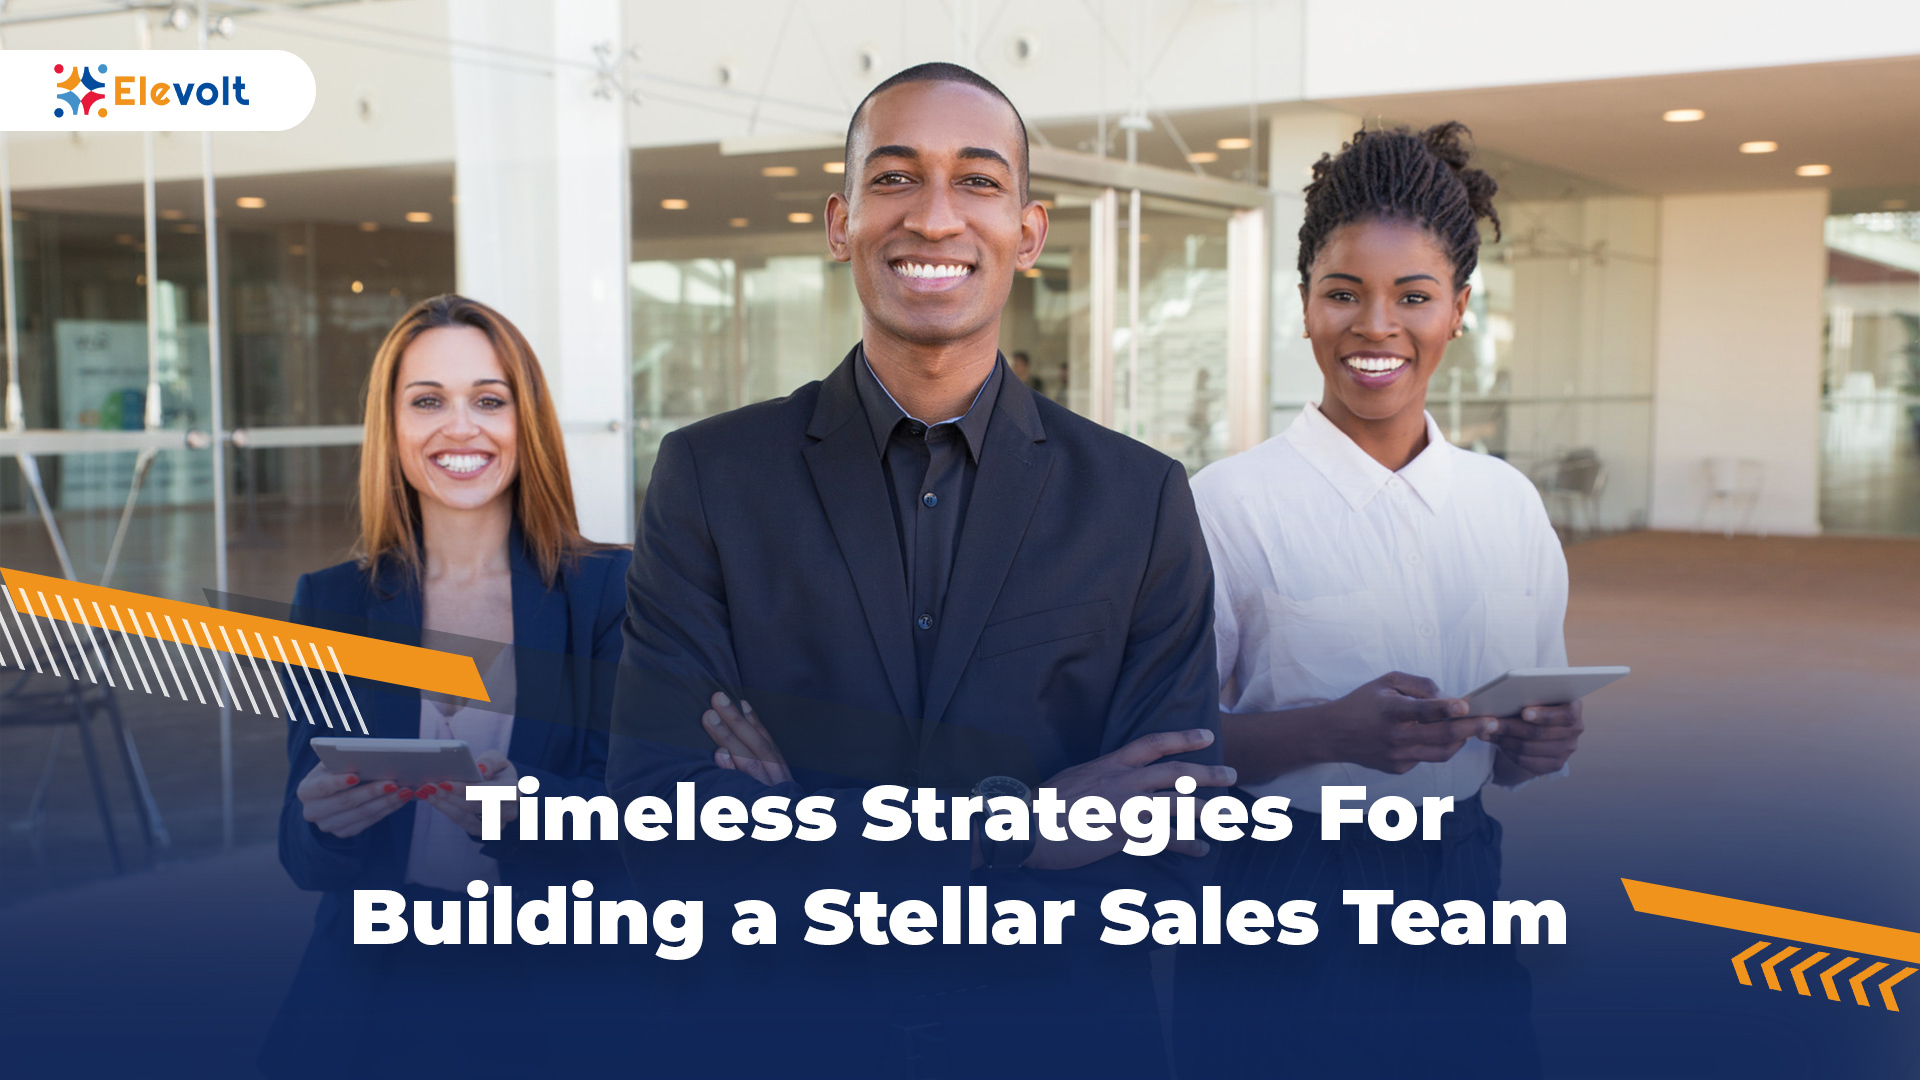 Timeless Strategies For Building a Stellar Sales Team